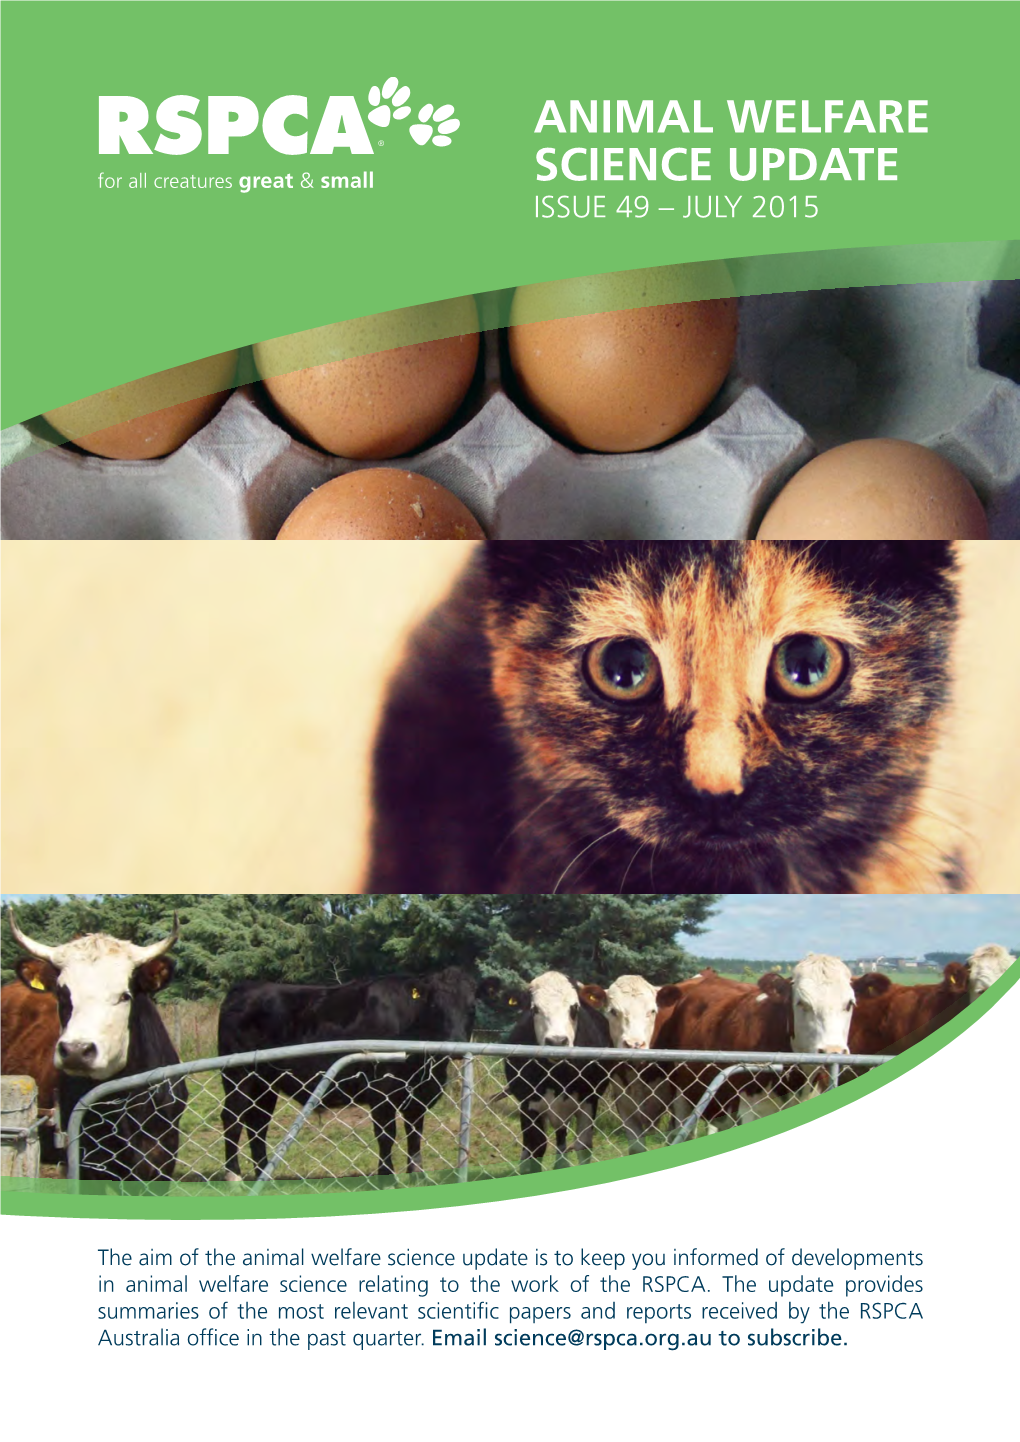 Animal Welfare Science Update Issue 49 – July 2015